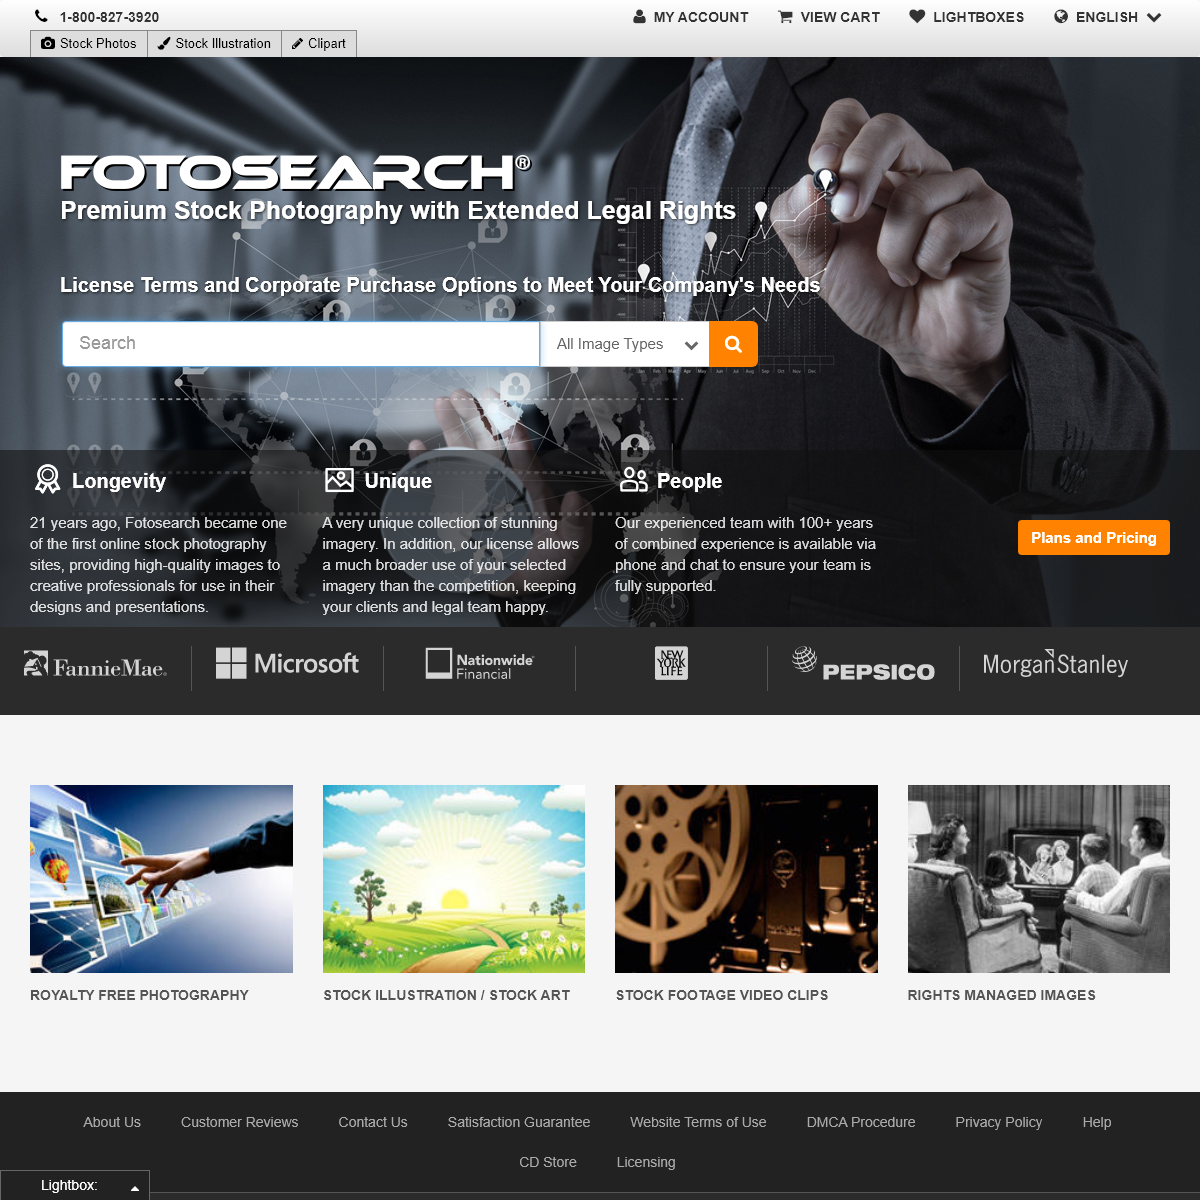 A complete backup of fotosearch.com